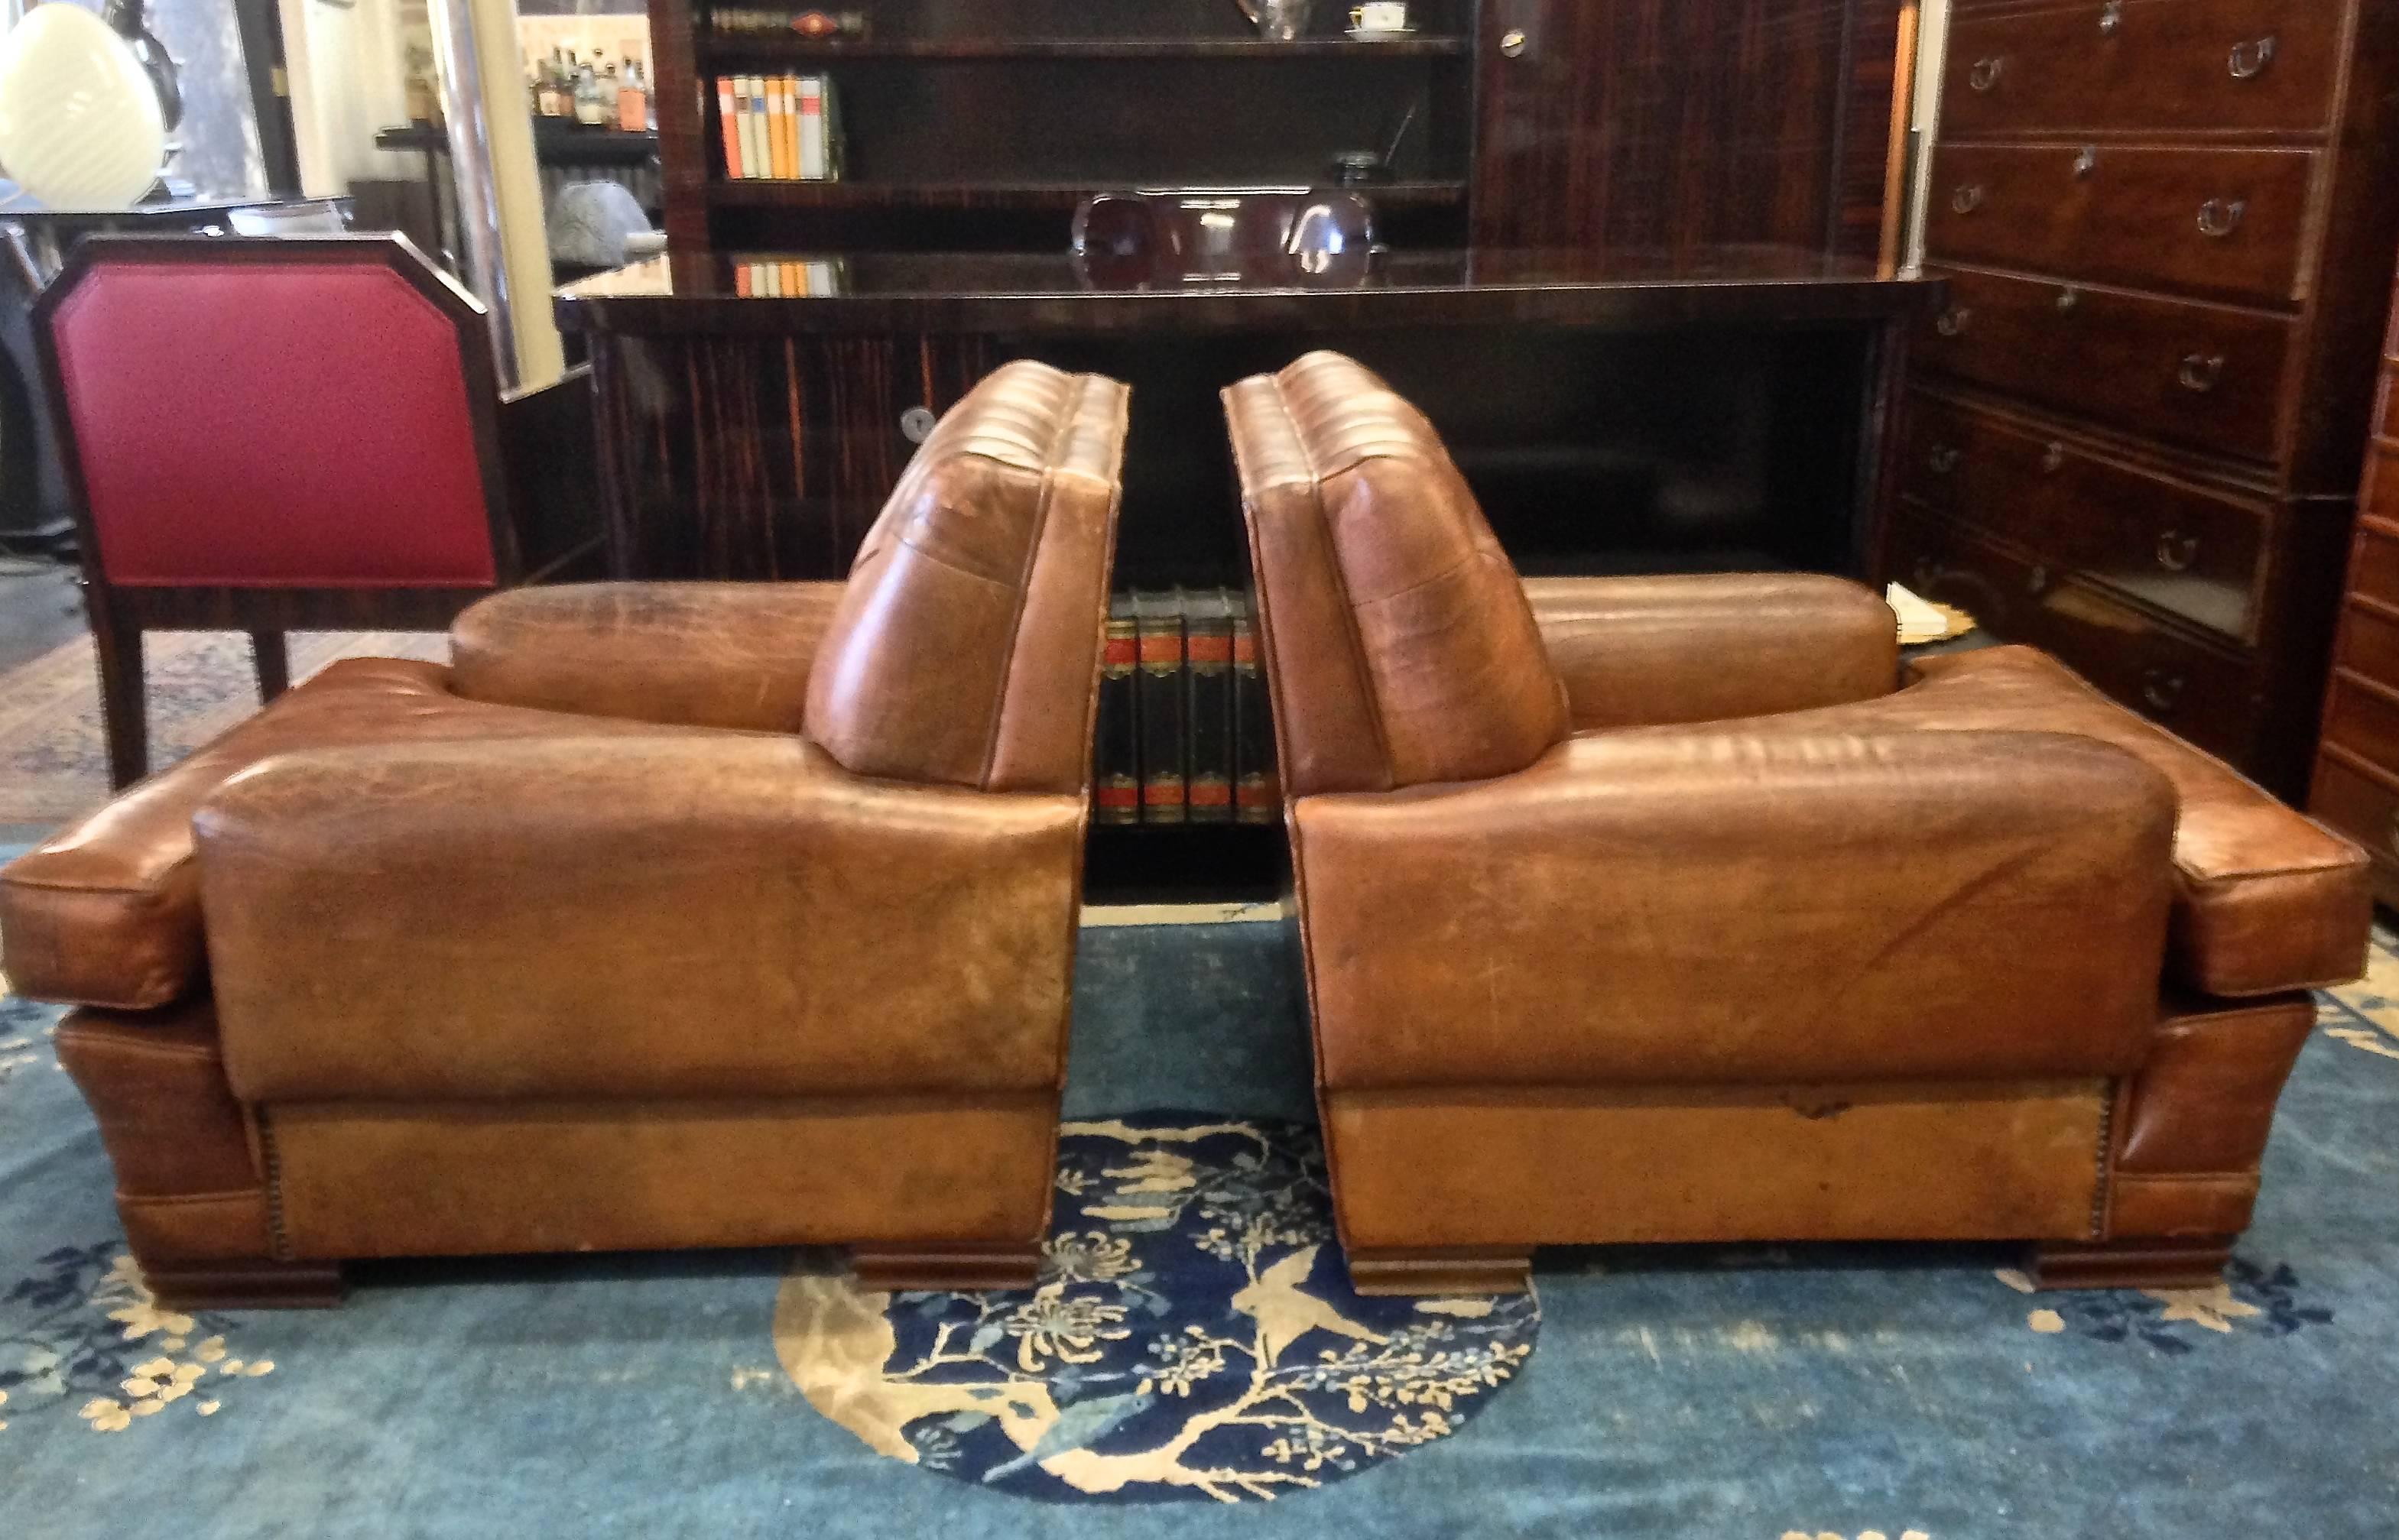 Pair of Original 1920s French Art Deco Button Tufted Leather Club Chairs In Distressed Condition For Sale In Minneapolis, MN